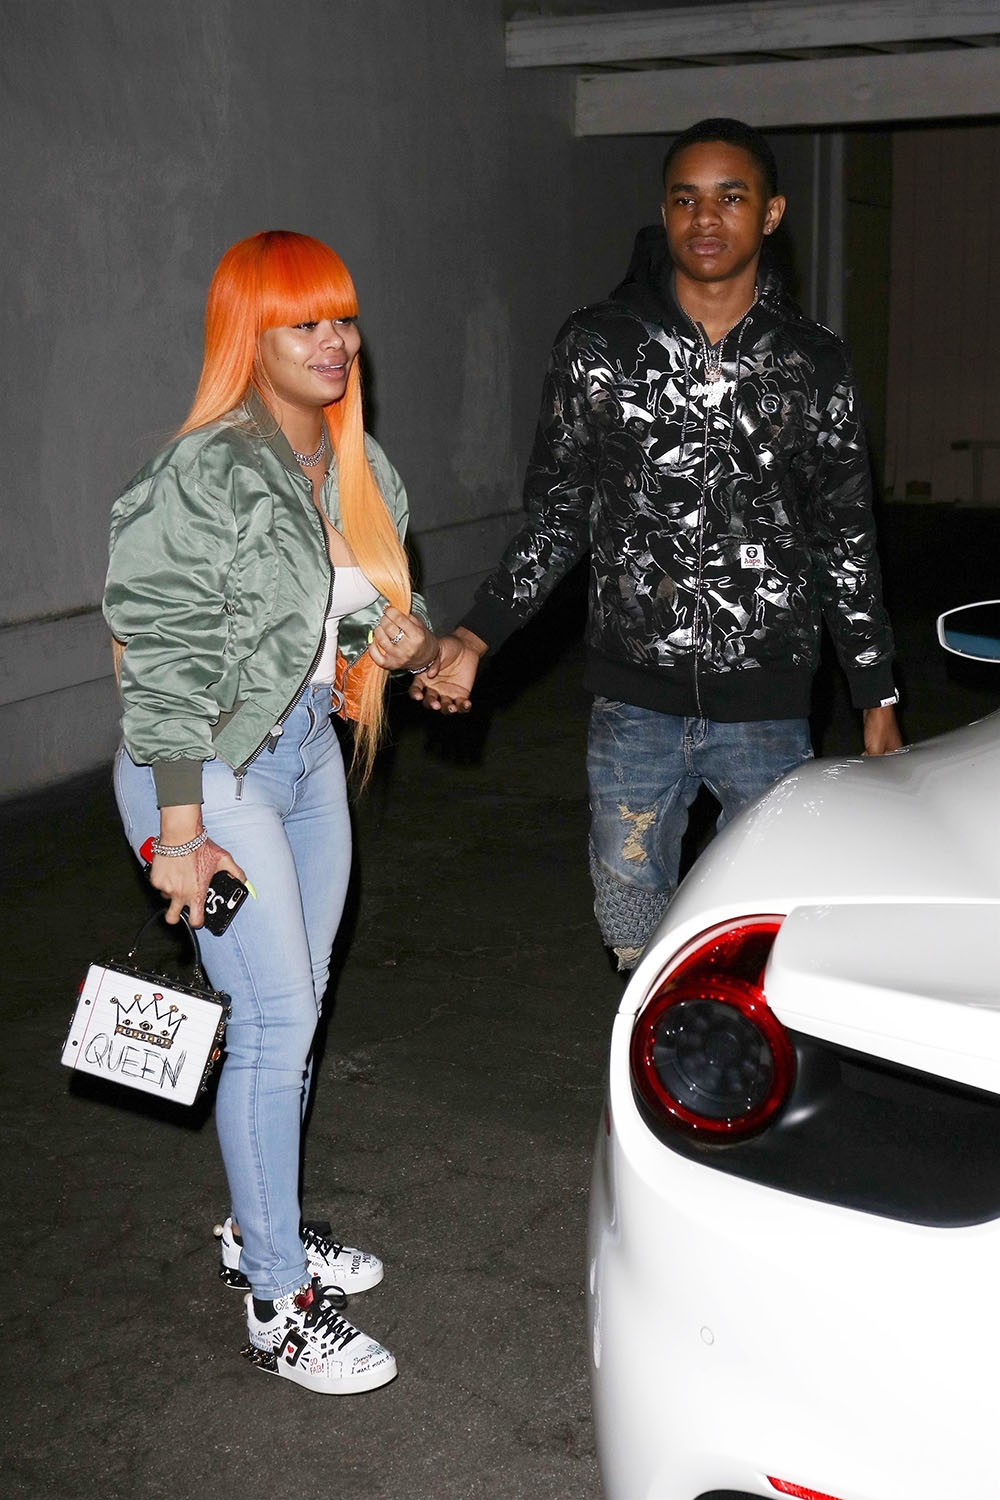 Blac Chyna and rapper YBN Almighty Jay in Studio City